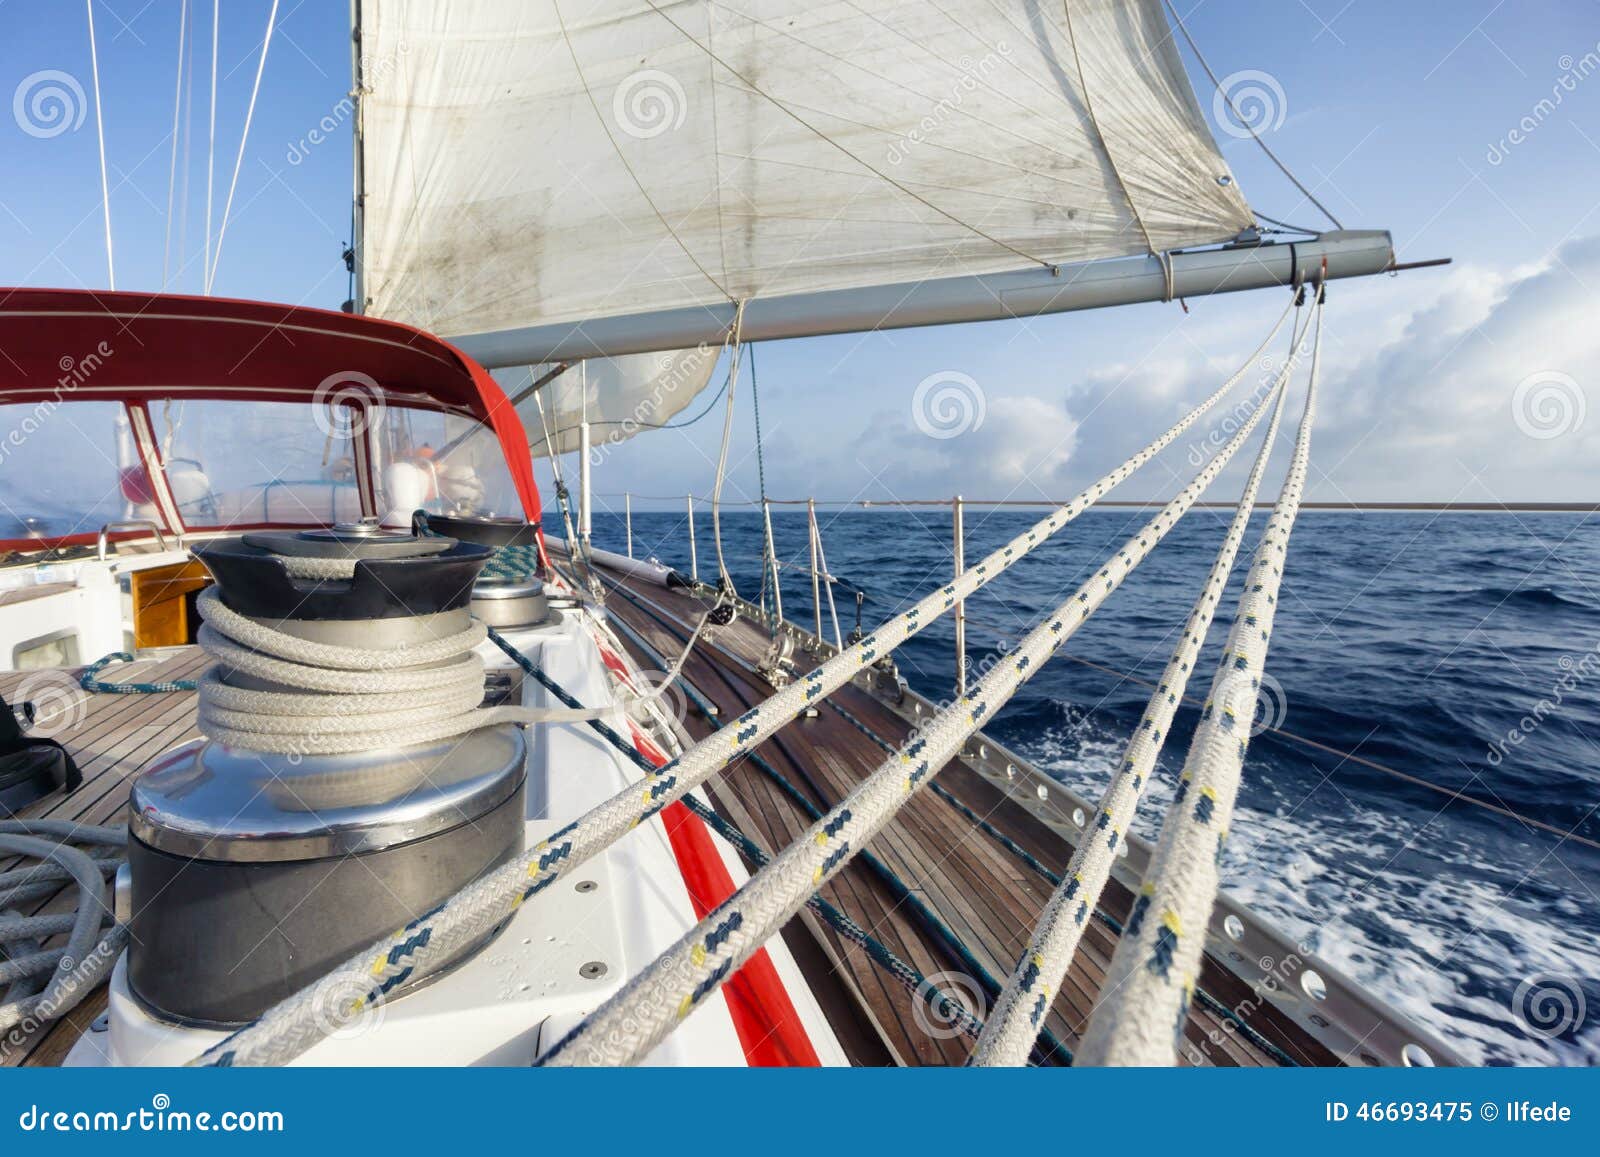 Rope On Sail Boat Stock Photo - Image: 46693475